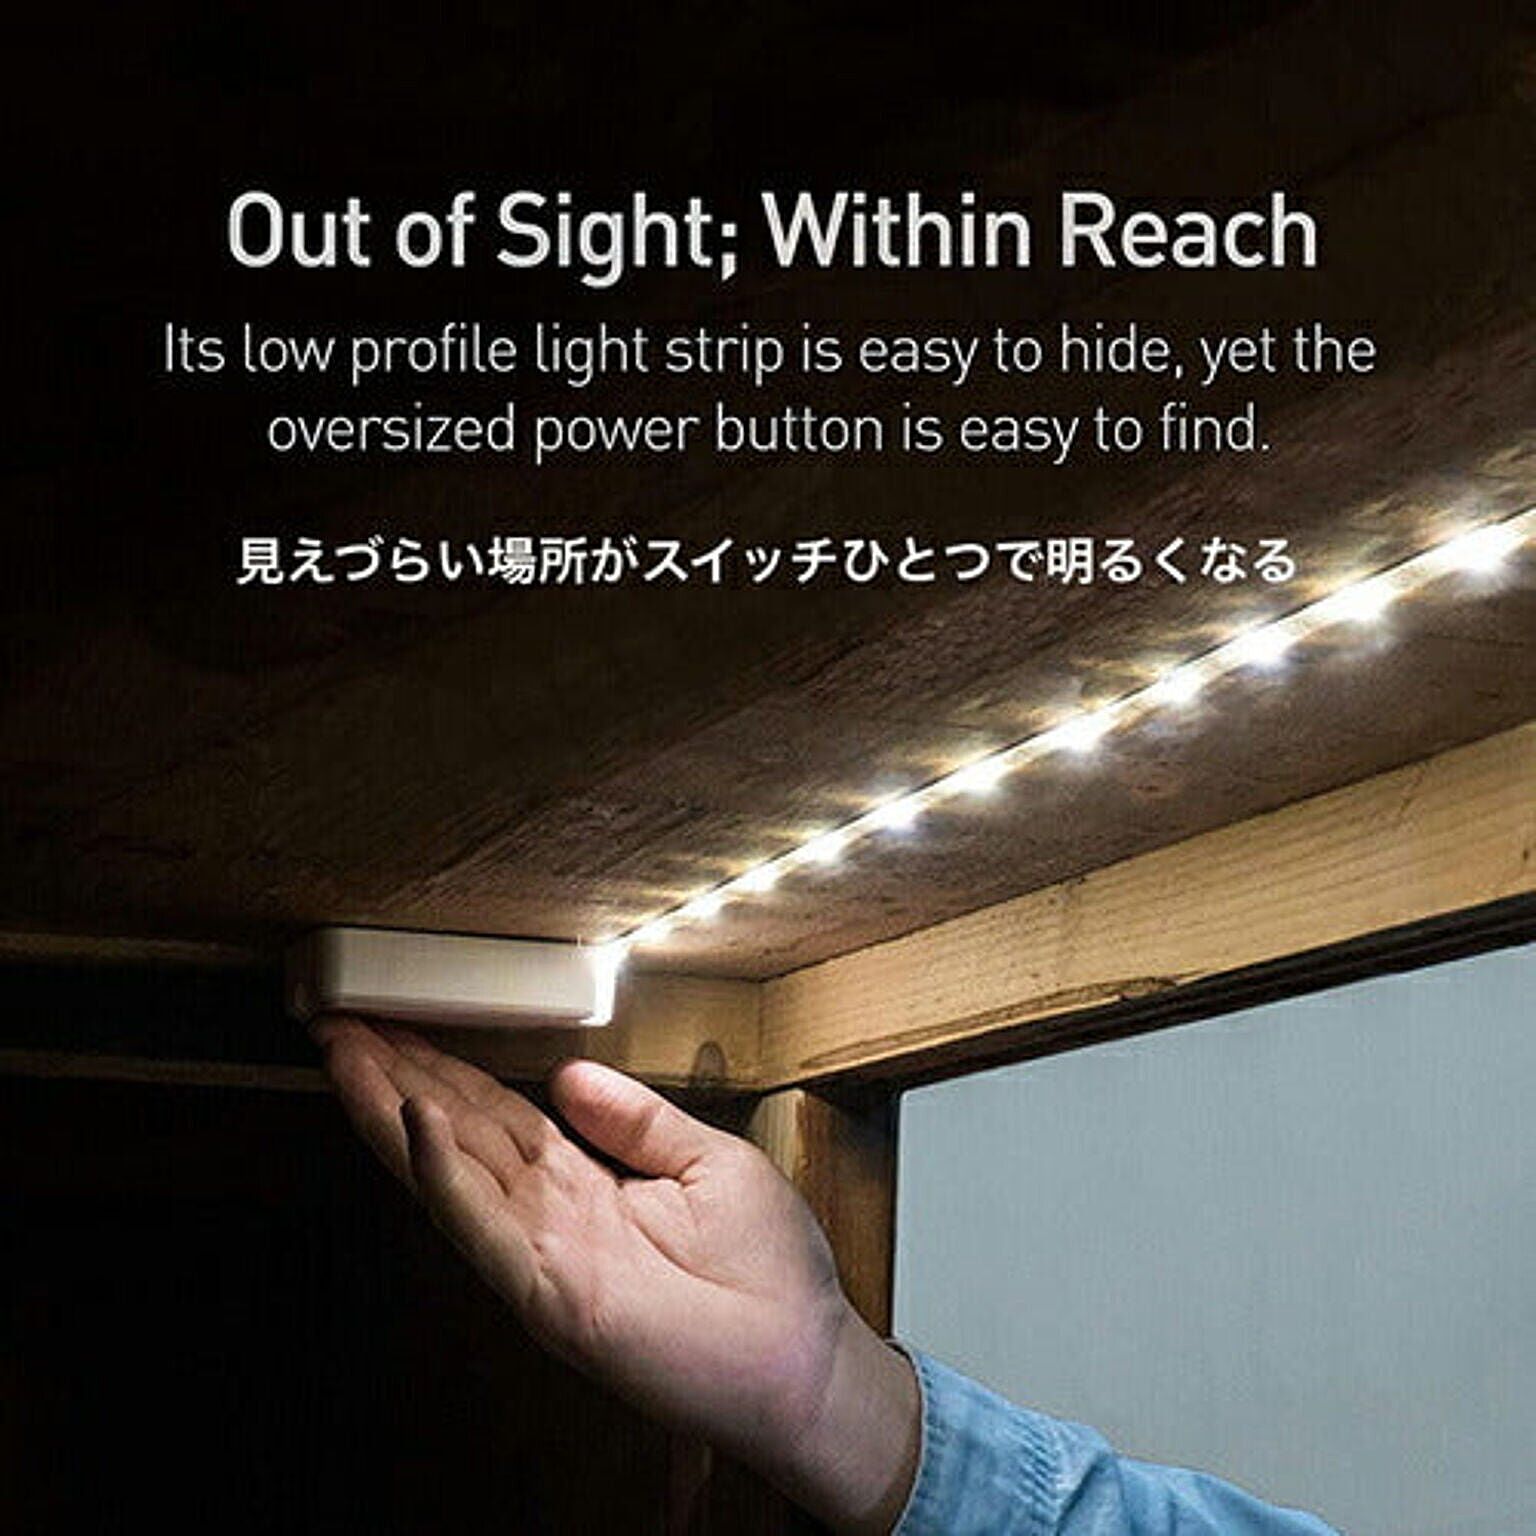 Power Practical LEDライト ロープライト 暖色 Luminoodle Click warm white LUMCL27 通販  家具とインテリアの通販【RoomClipショッピング】